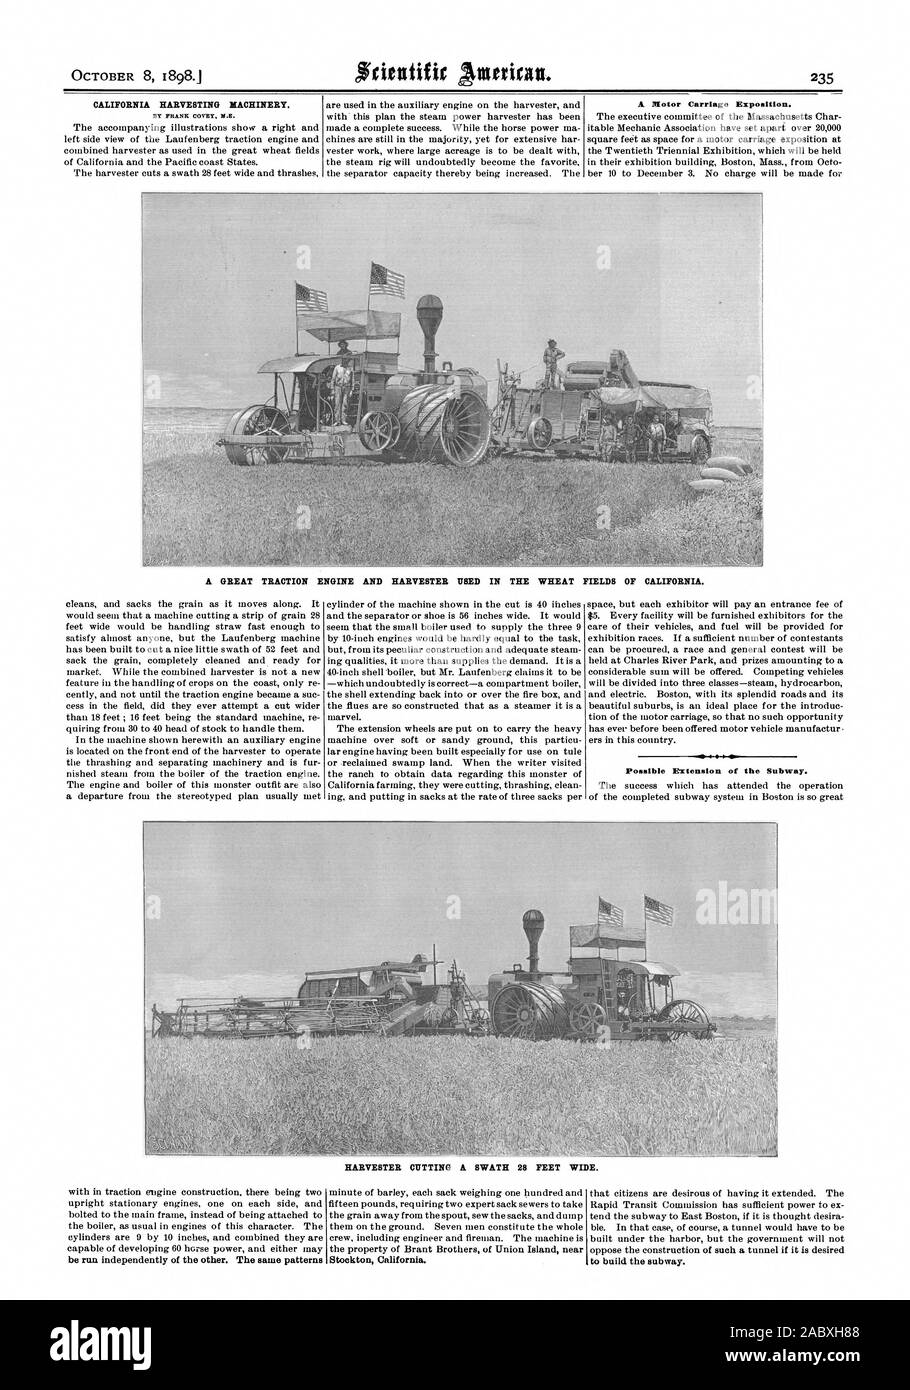 OCTOBER 8 1898. CALIFORNIA HARVESTING MACHINERY. BY FRANK COVEY M.E. A Motor Carriage Exposition. A GREAT TRACTION ENGINE AND HARVESTER USED IN THE WHEAT FIELDS OF CALIFORNIA. Possible Extension of the Subway. HARVESTER CUTTING A SWATH 28 FEET WIDE. be run independently of the other. The same patterns Stockton California. to build the subway., scientific american, 1898-10-08 Stock Photo